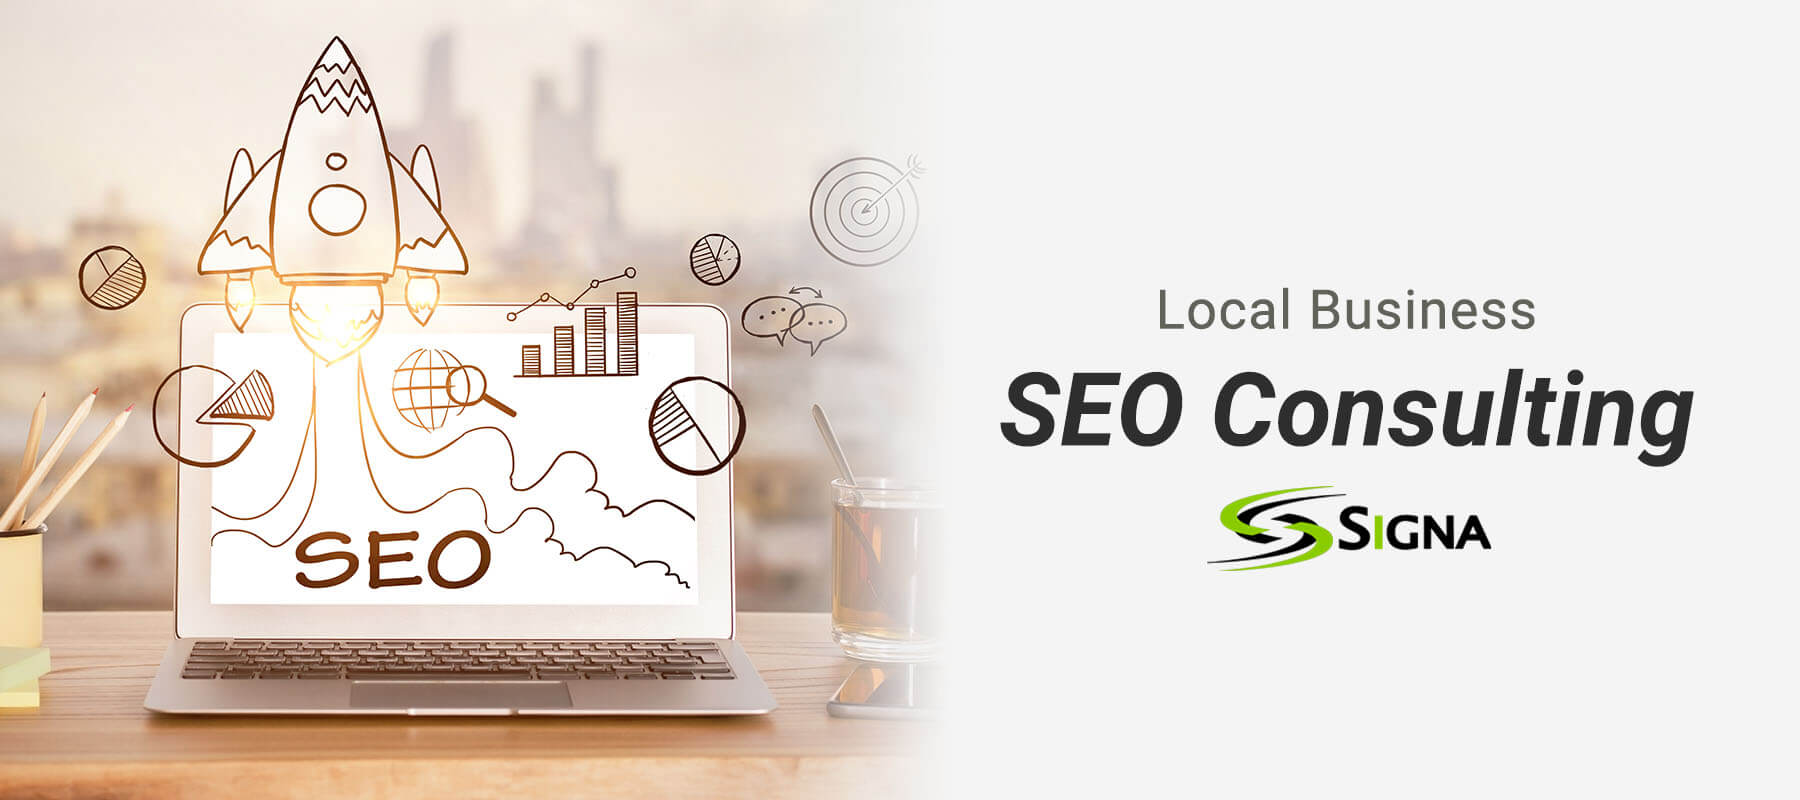 SEO Consulting Services Toronto - Improve your Organic Google Ranking